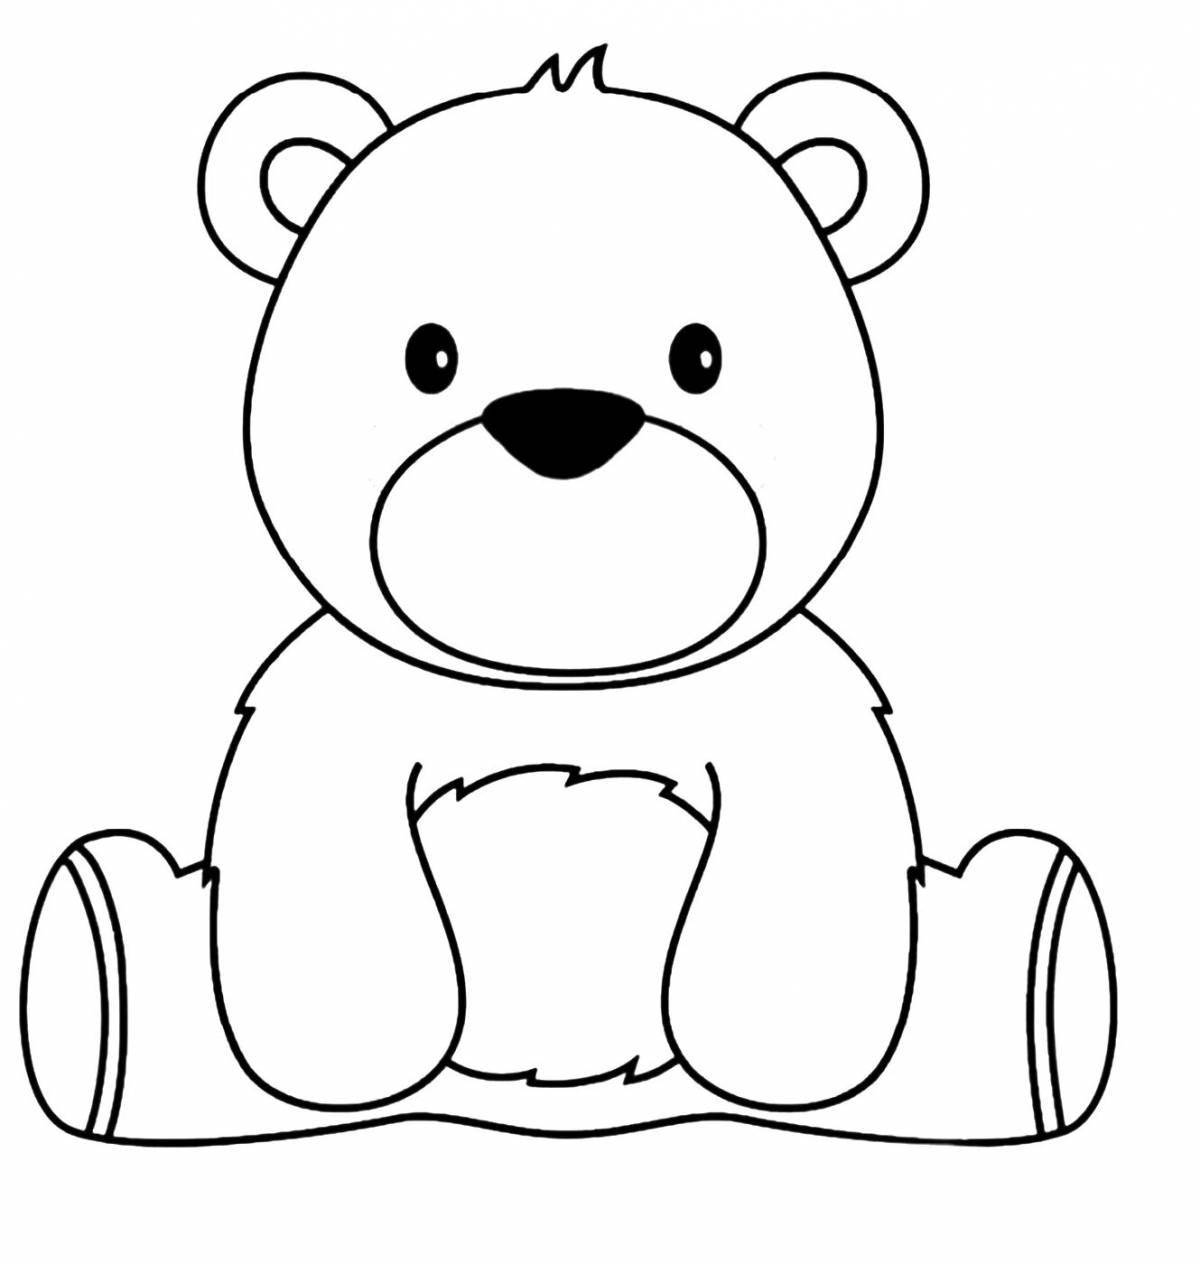 Live teddy bear coloring book